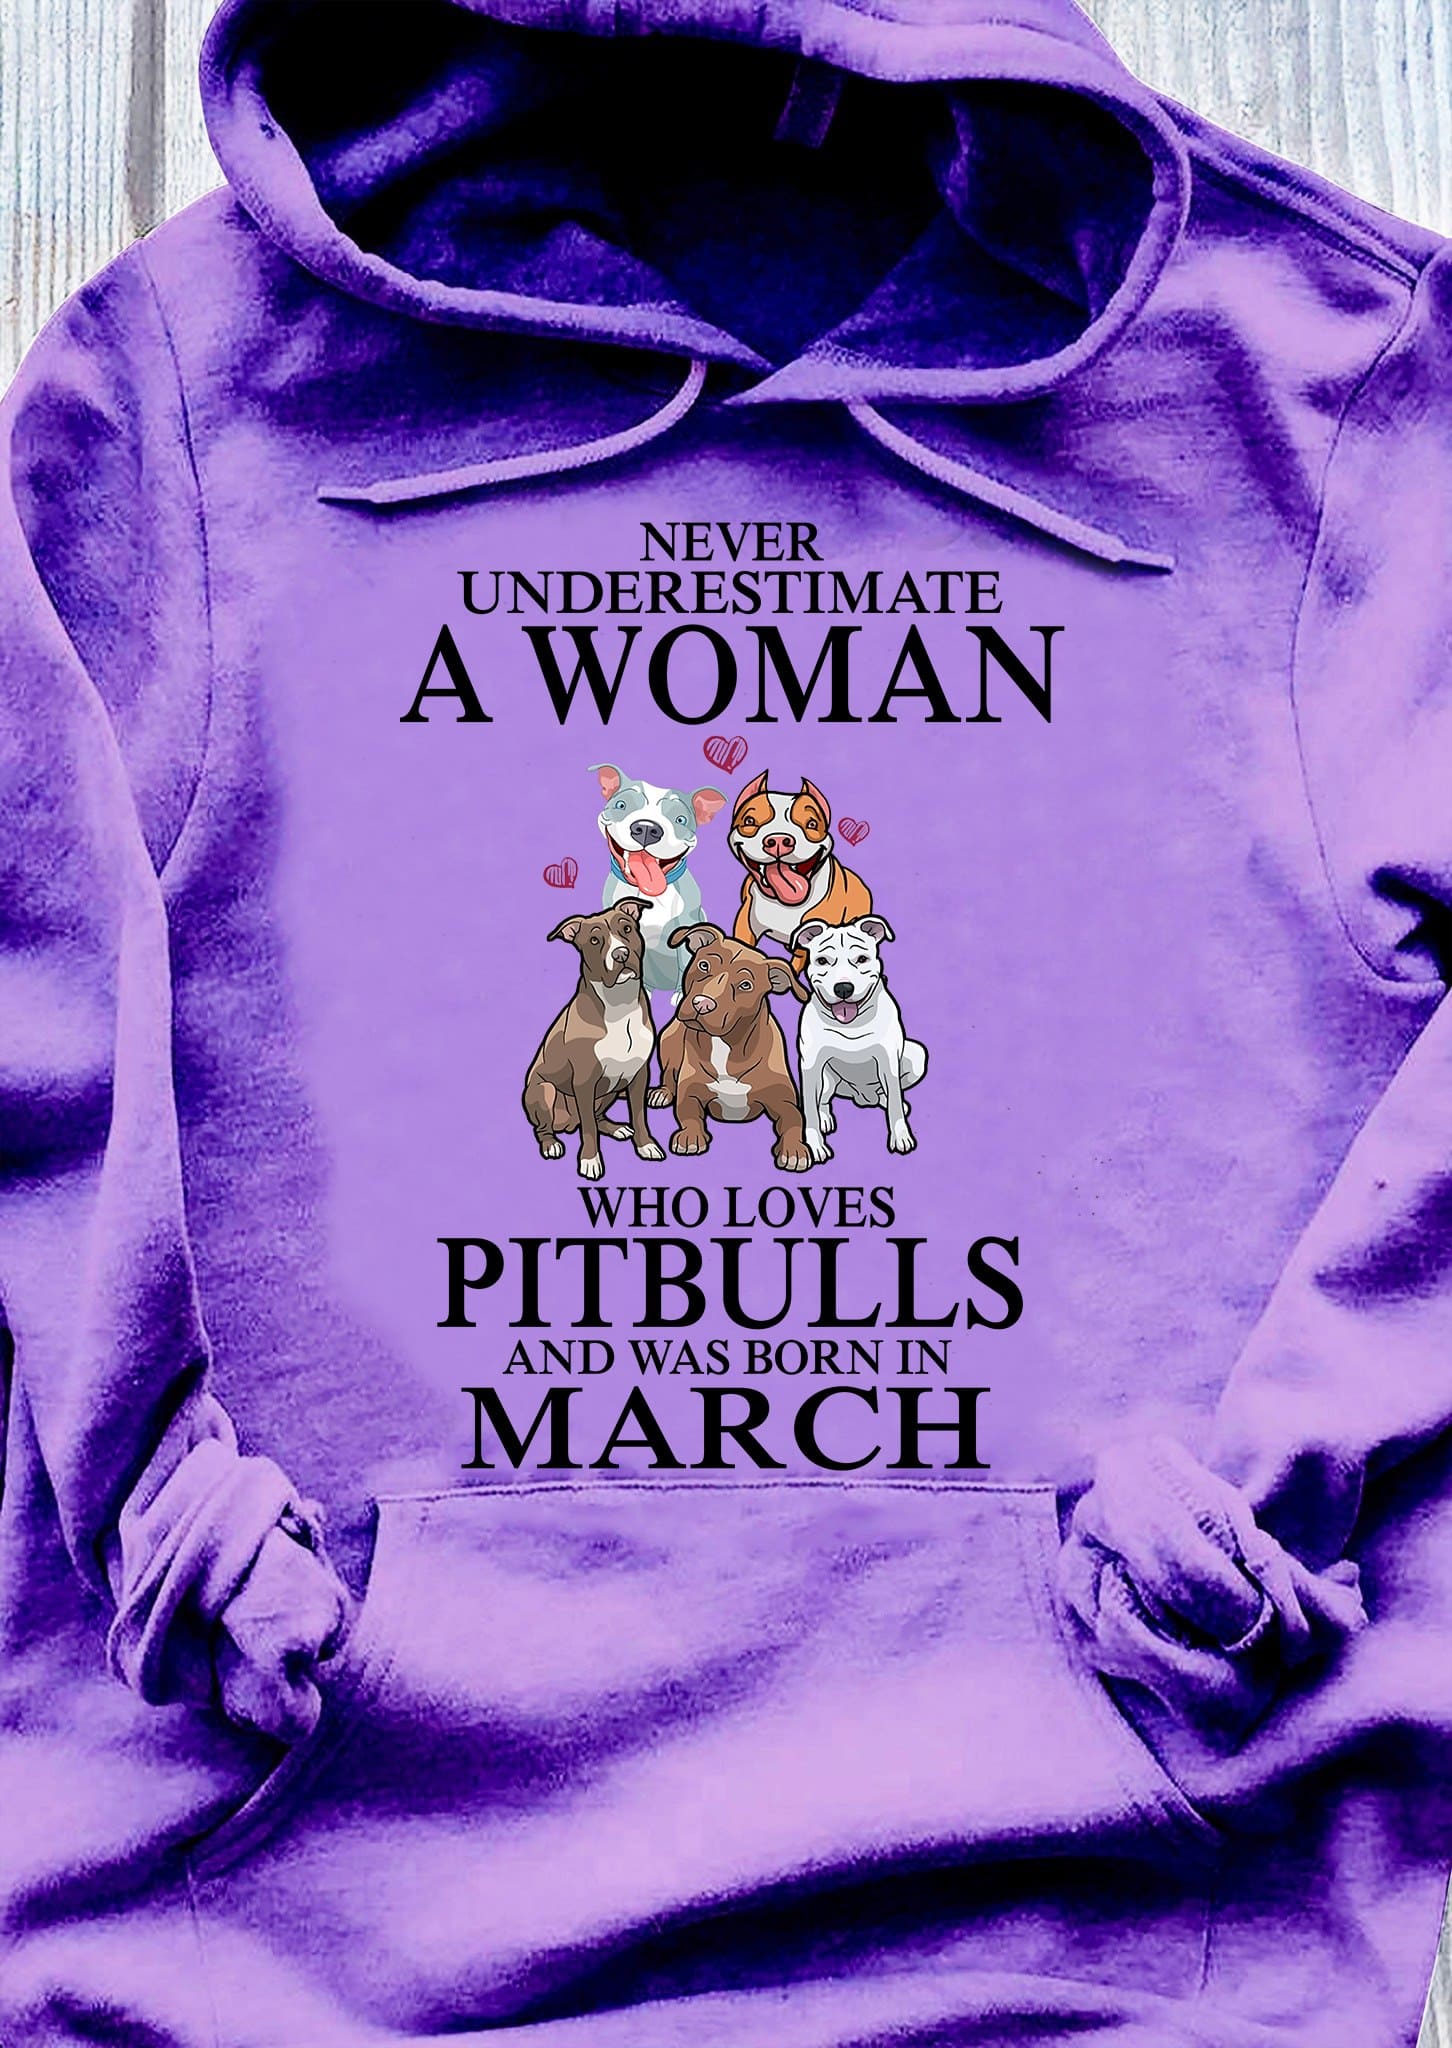 March Birthday Woman Love Pitbull - Never underestimate a woman who loves pitbull and was born in march